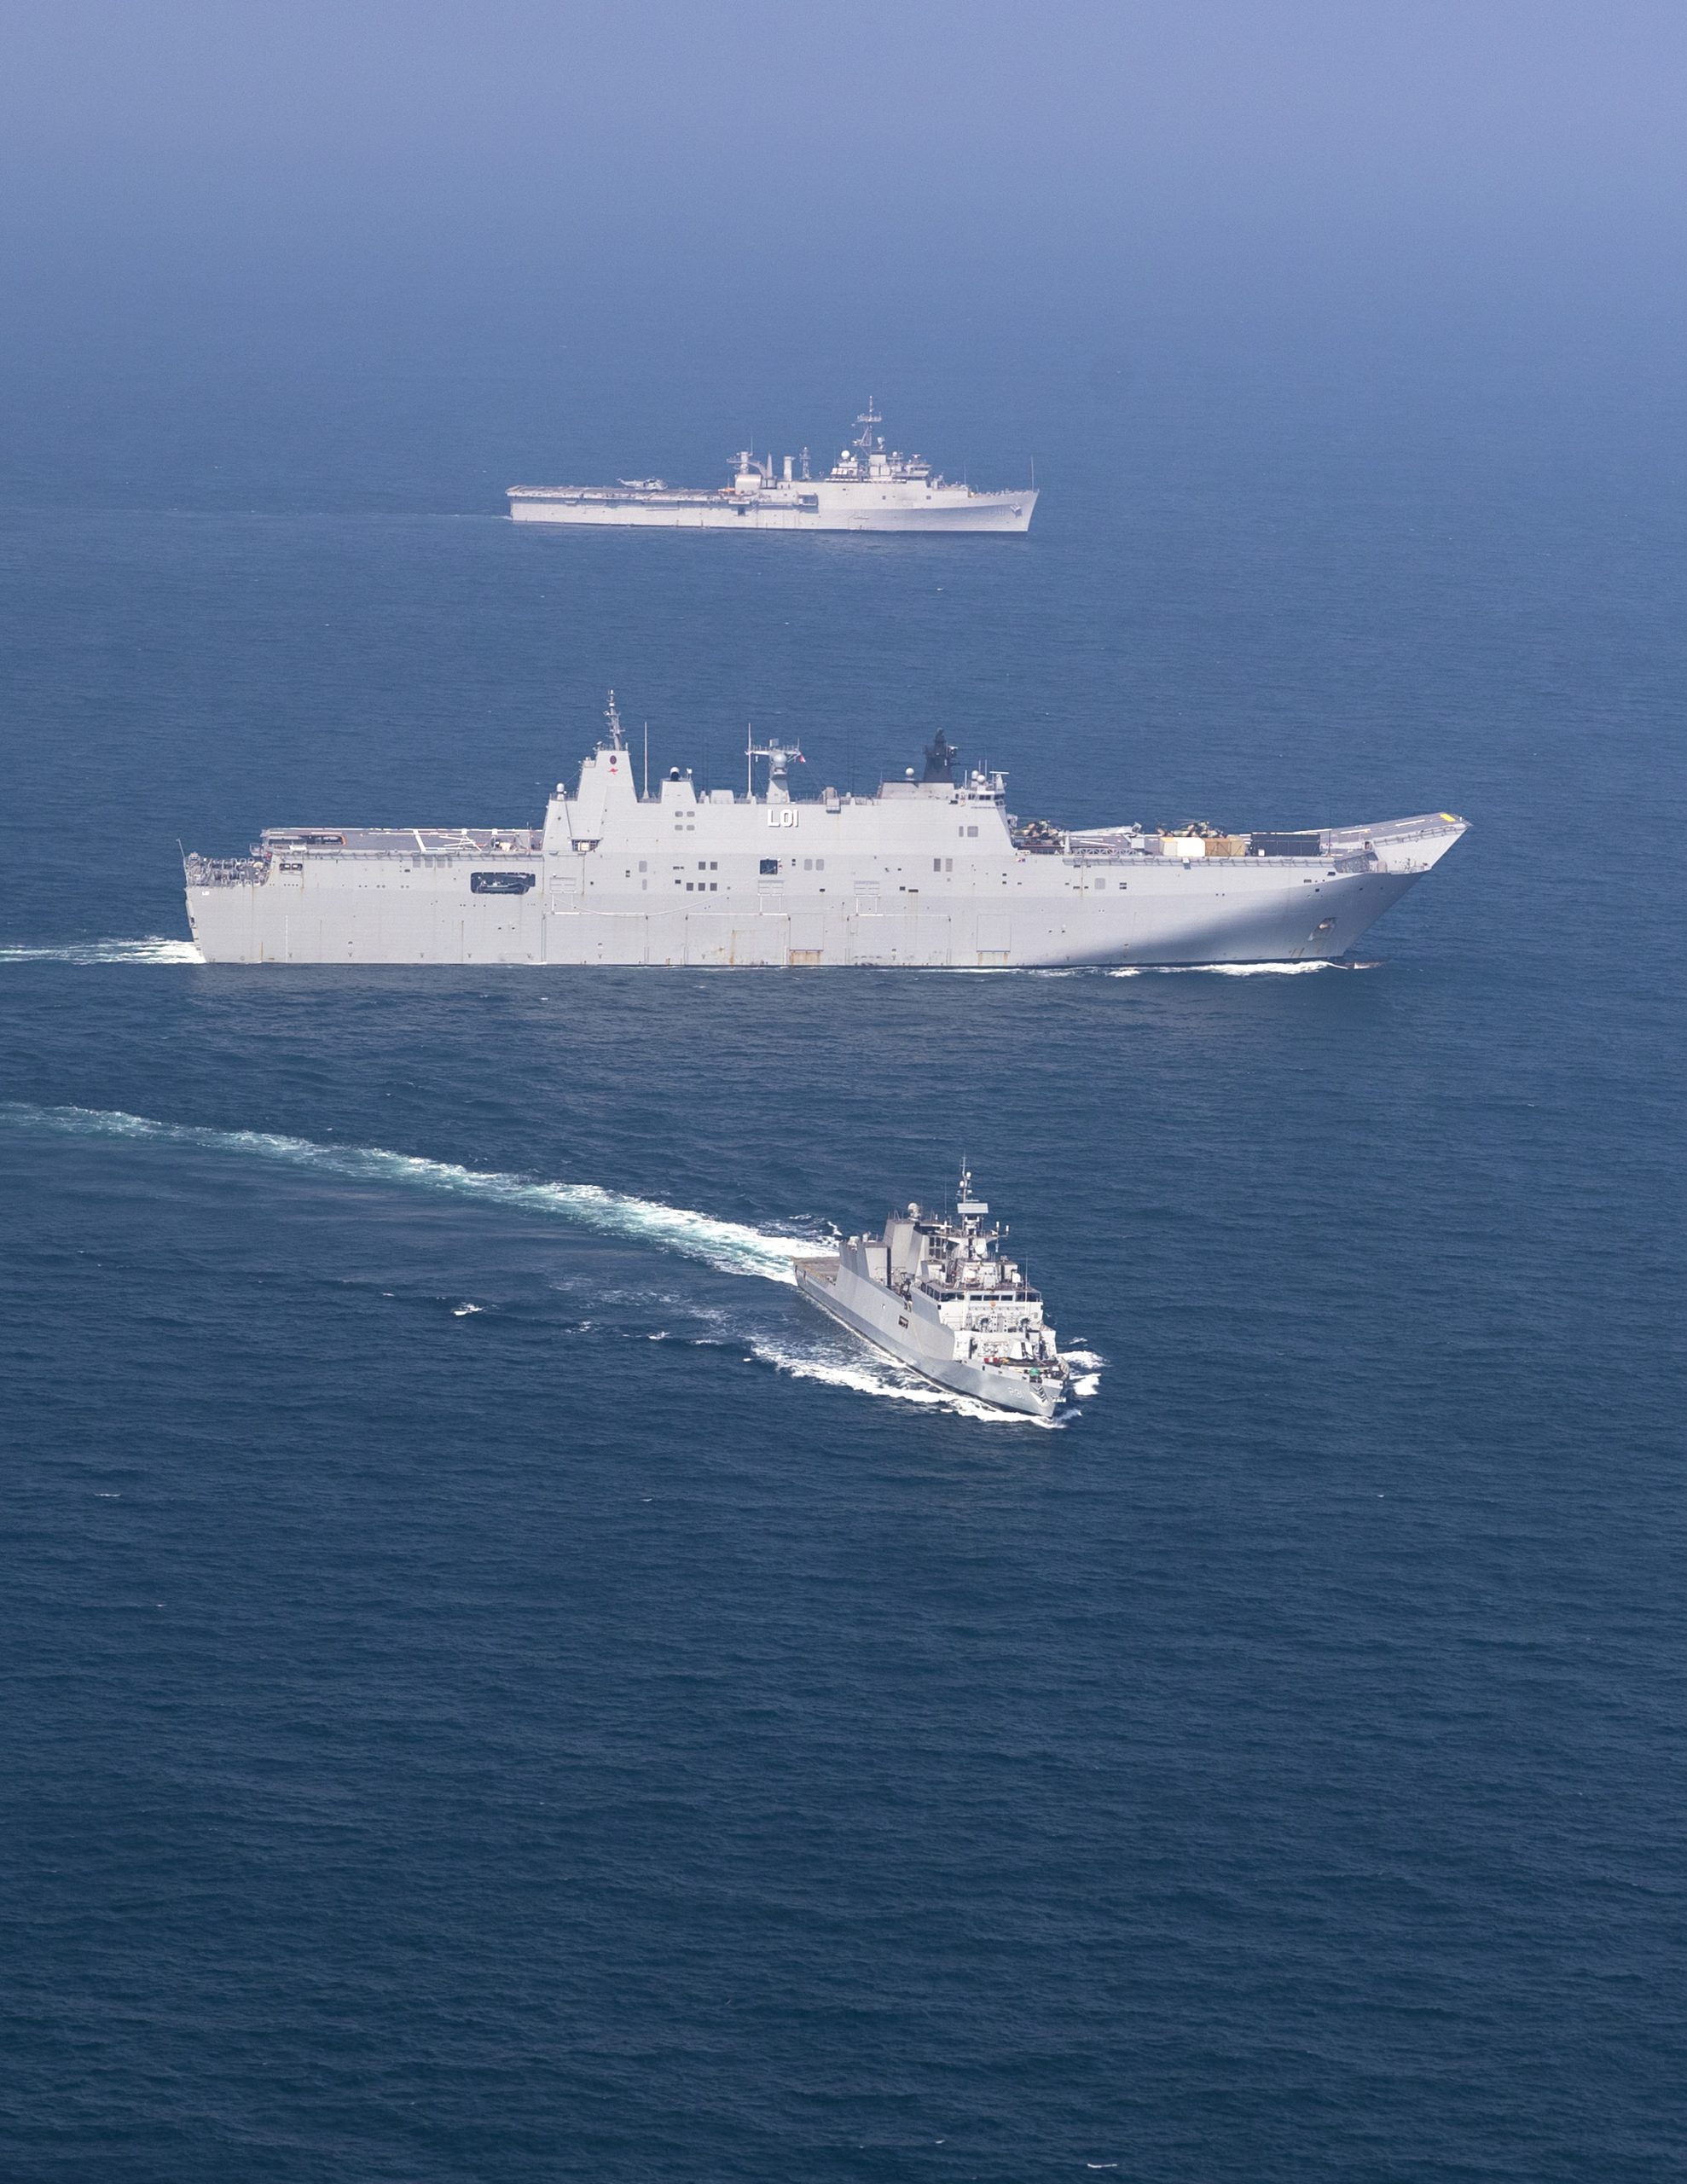 Maritime Partnership Exercise with Royal Australian Navy Conclude in the Bay of Bengal